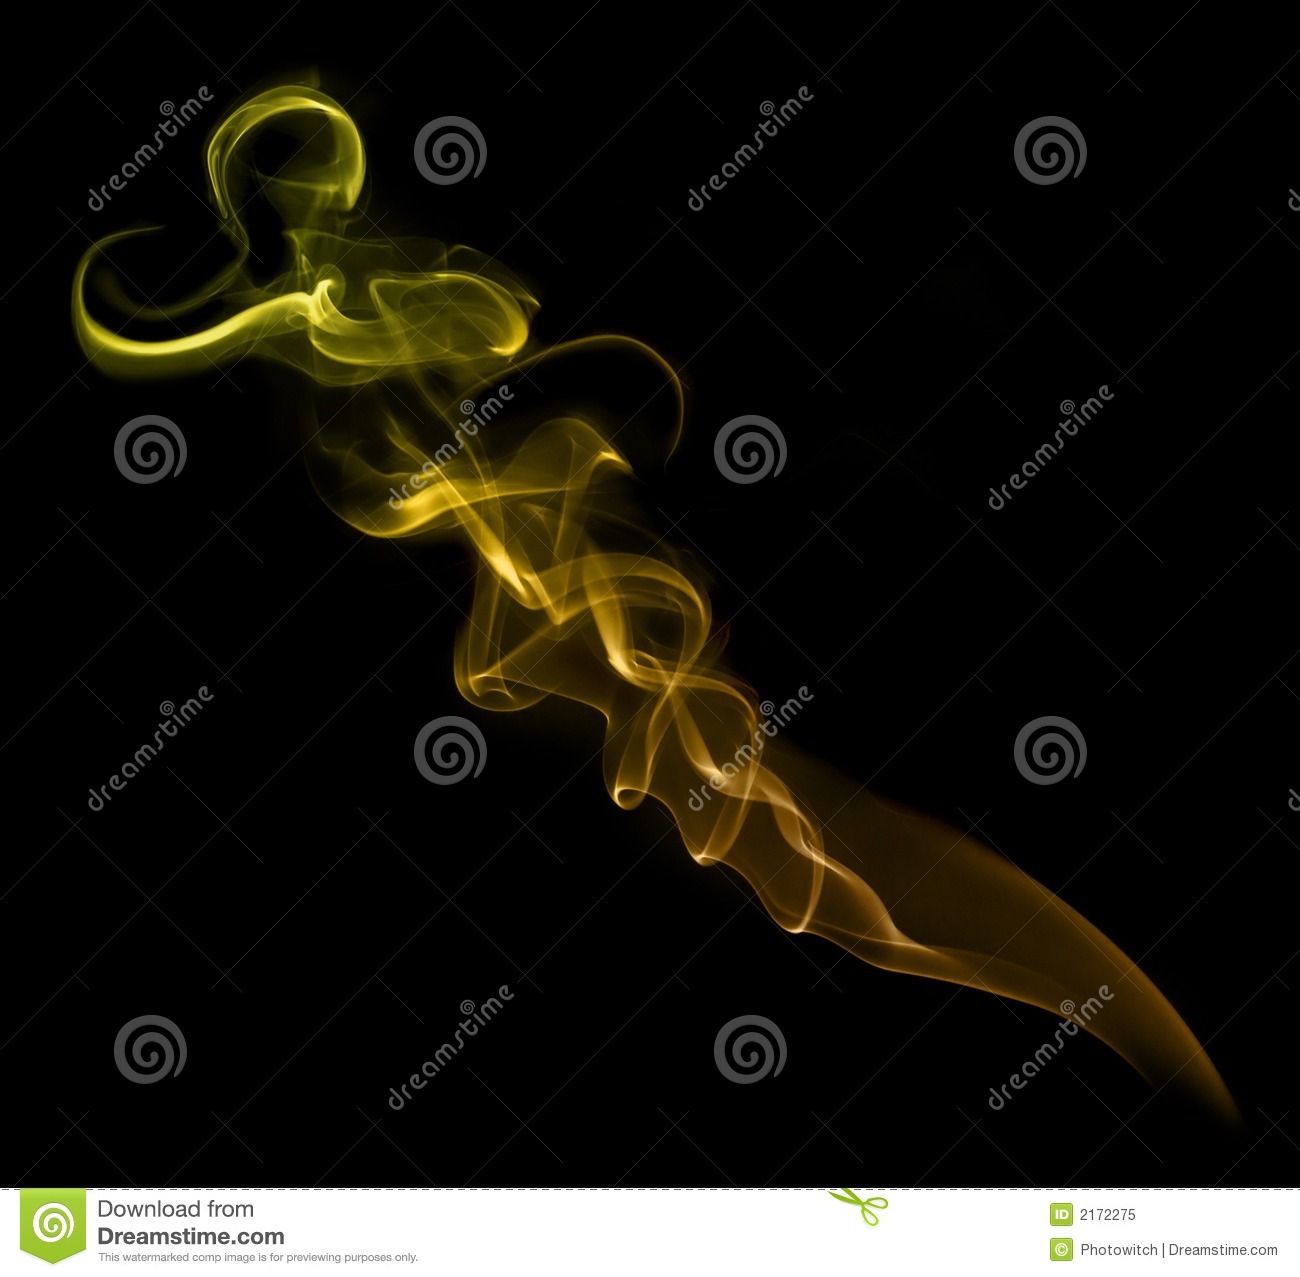 Yellow Wisp Of Real Smoke  Not Computer Rendered  Against A Black